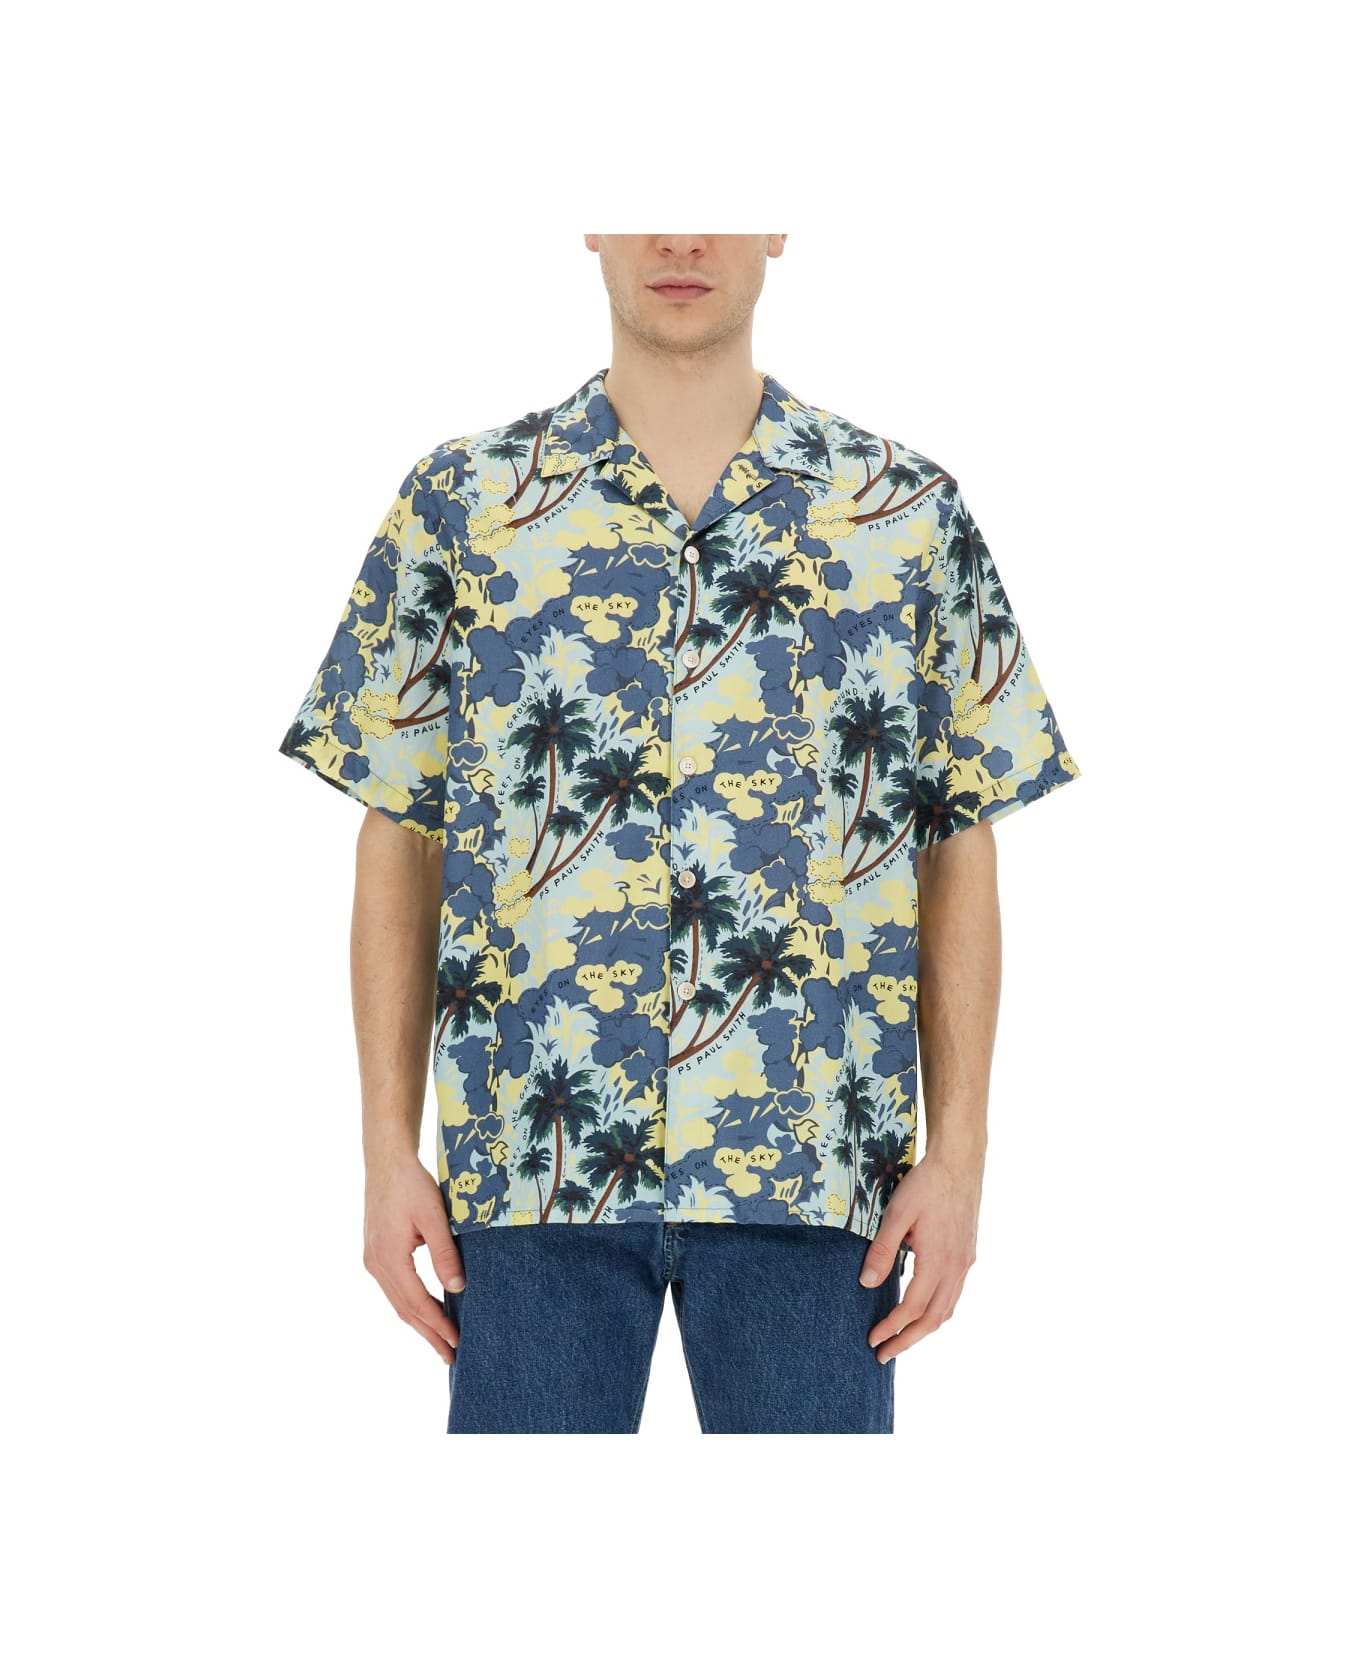 PS by Paul Smith Printed Shirt - MULTICOLOUR シャツ